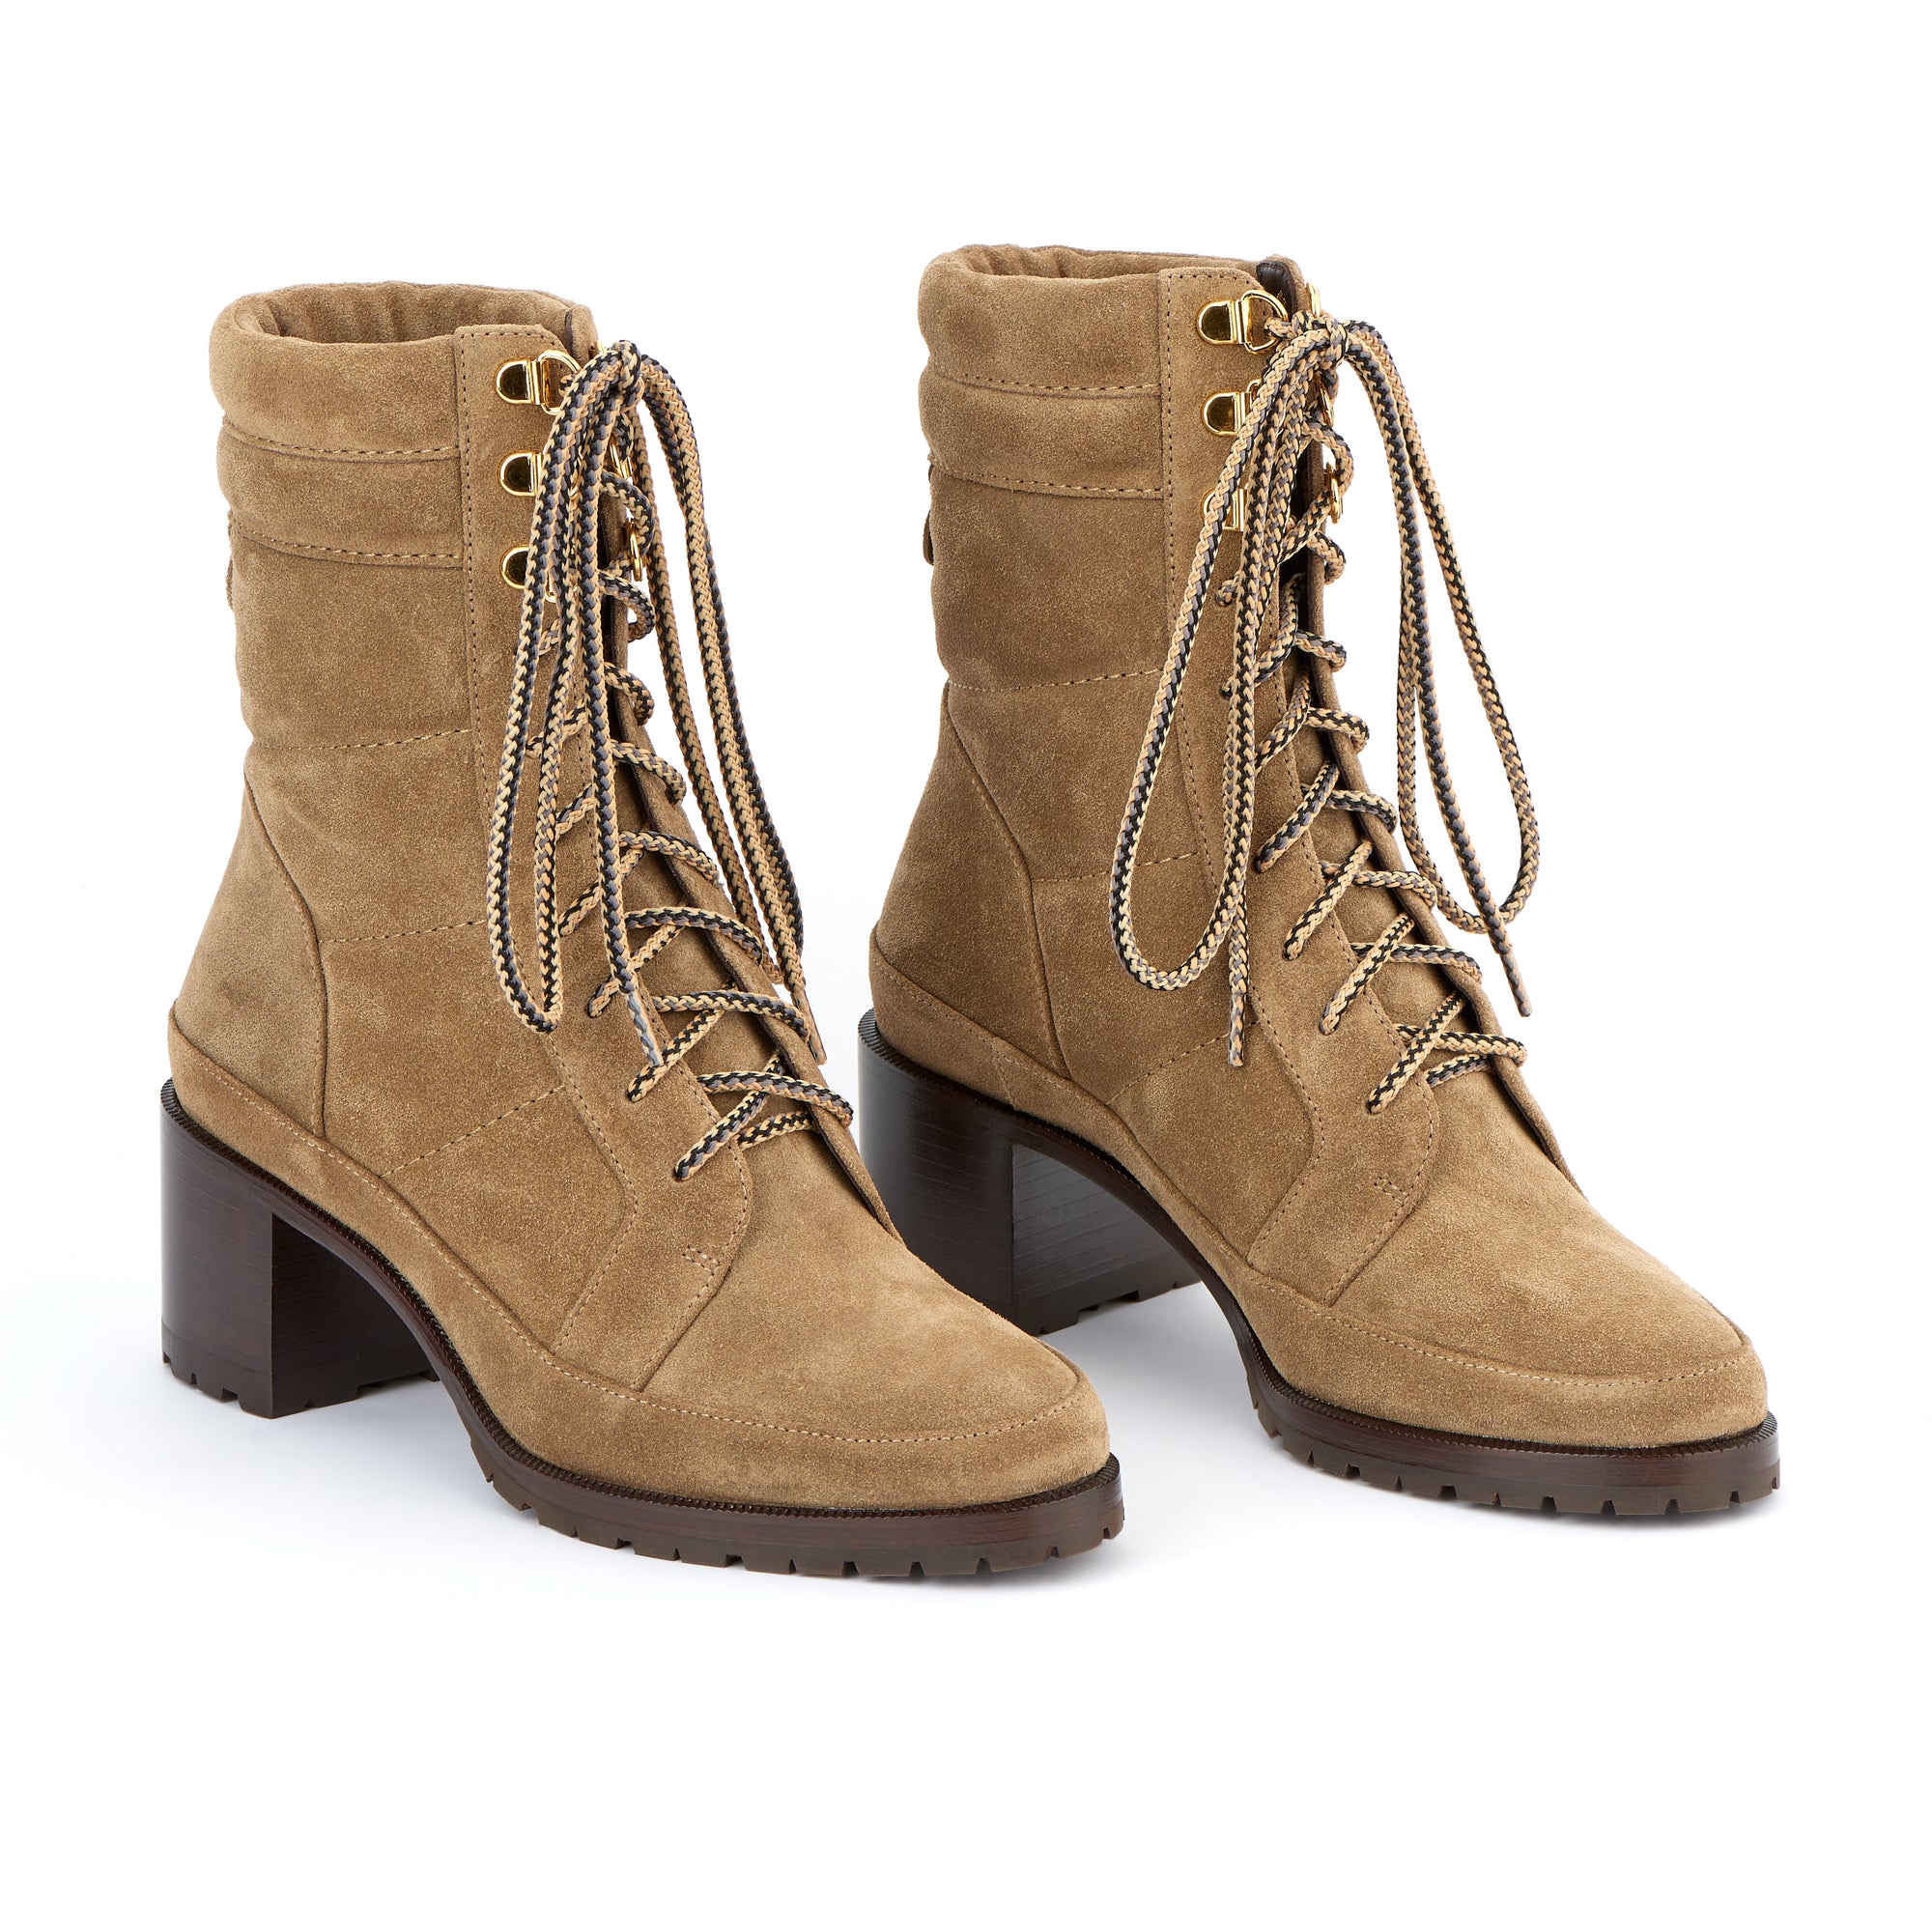 Rita boots with 50 laces in suede - Sand